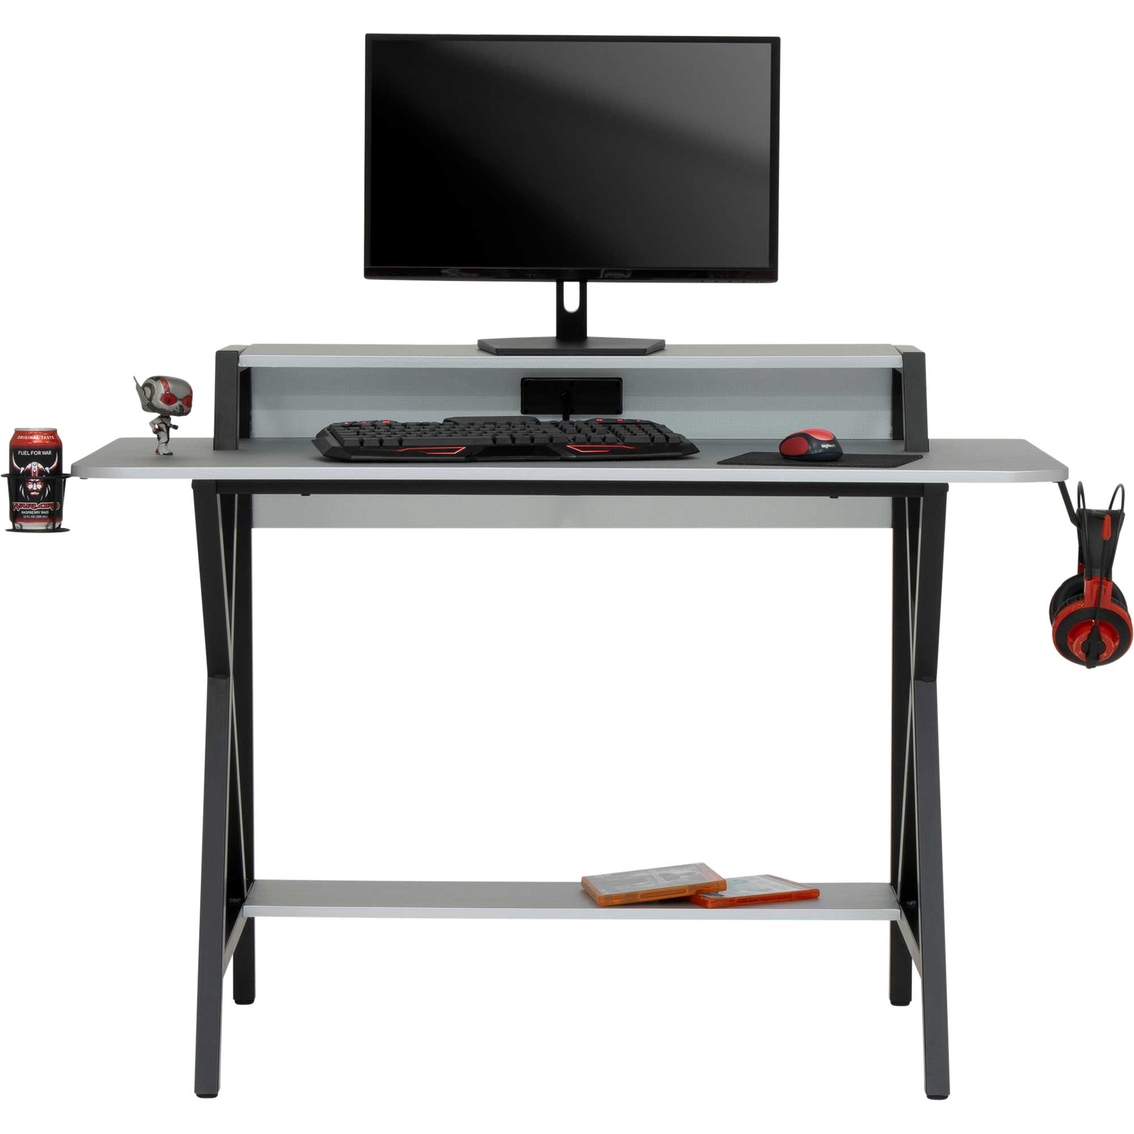 Calico Designs SD Gaming Challenger PC Gamer Computer Desk - Image 1 of 10